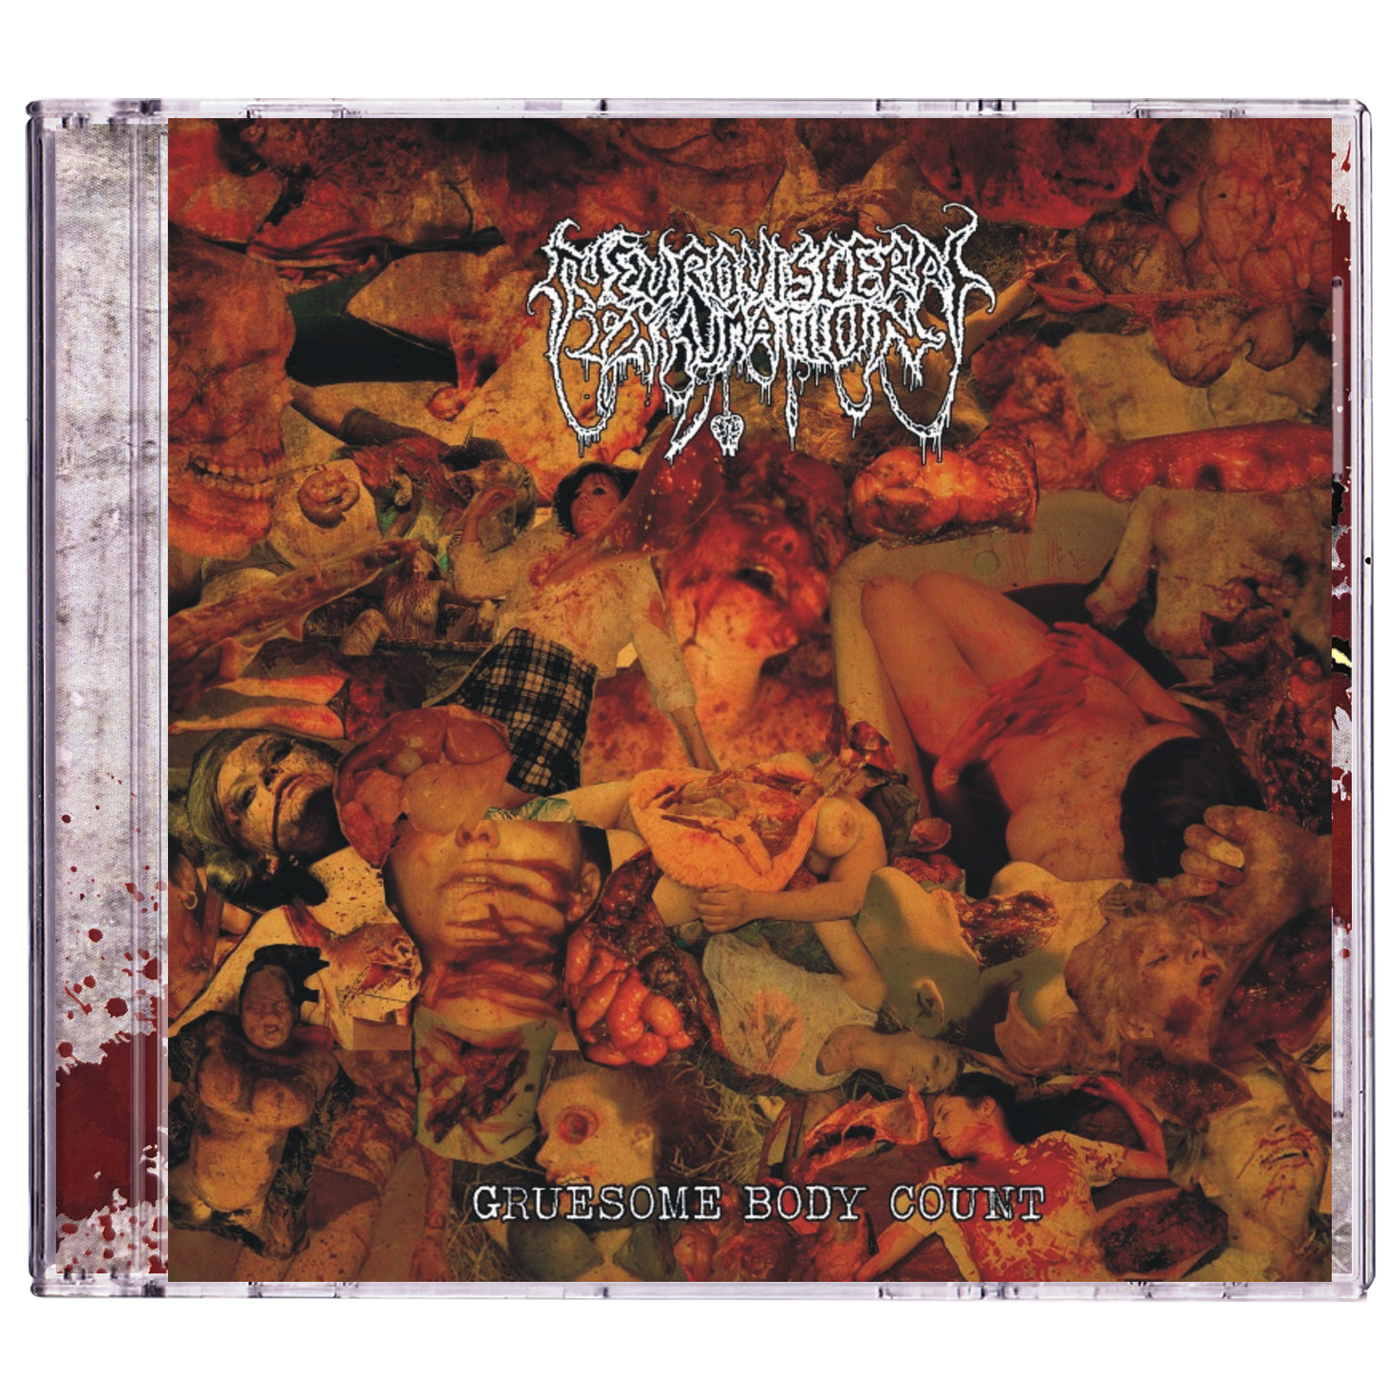 Neuro-Visceral Exhumation 'Gruesome Body Count' CD